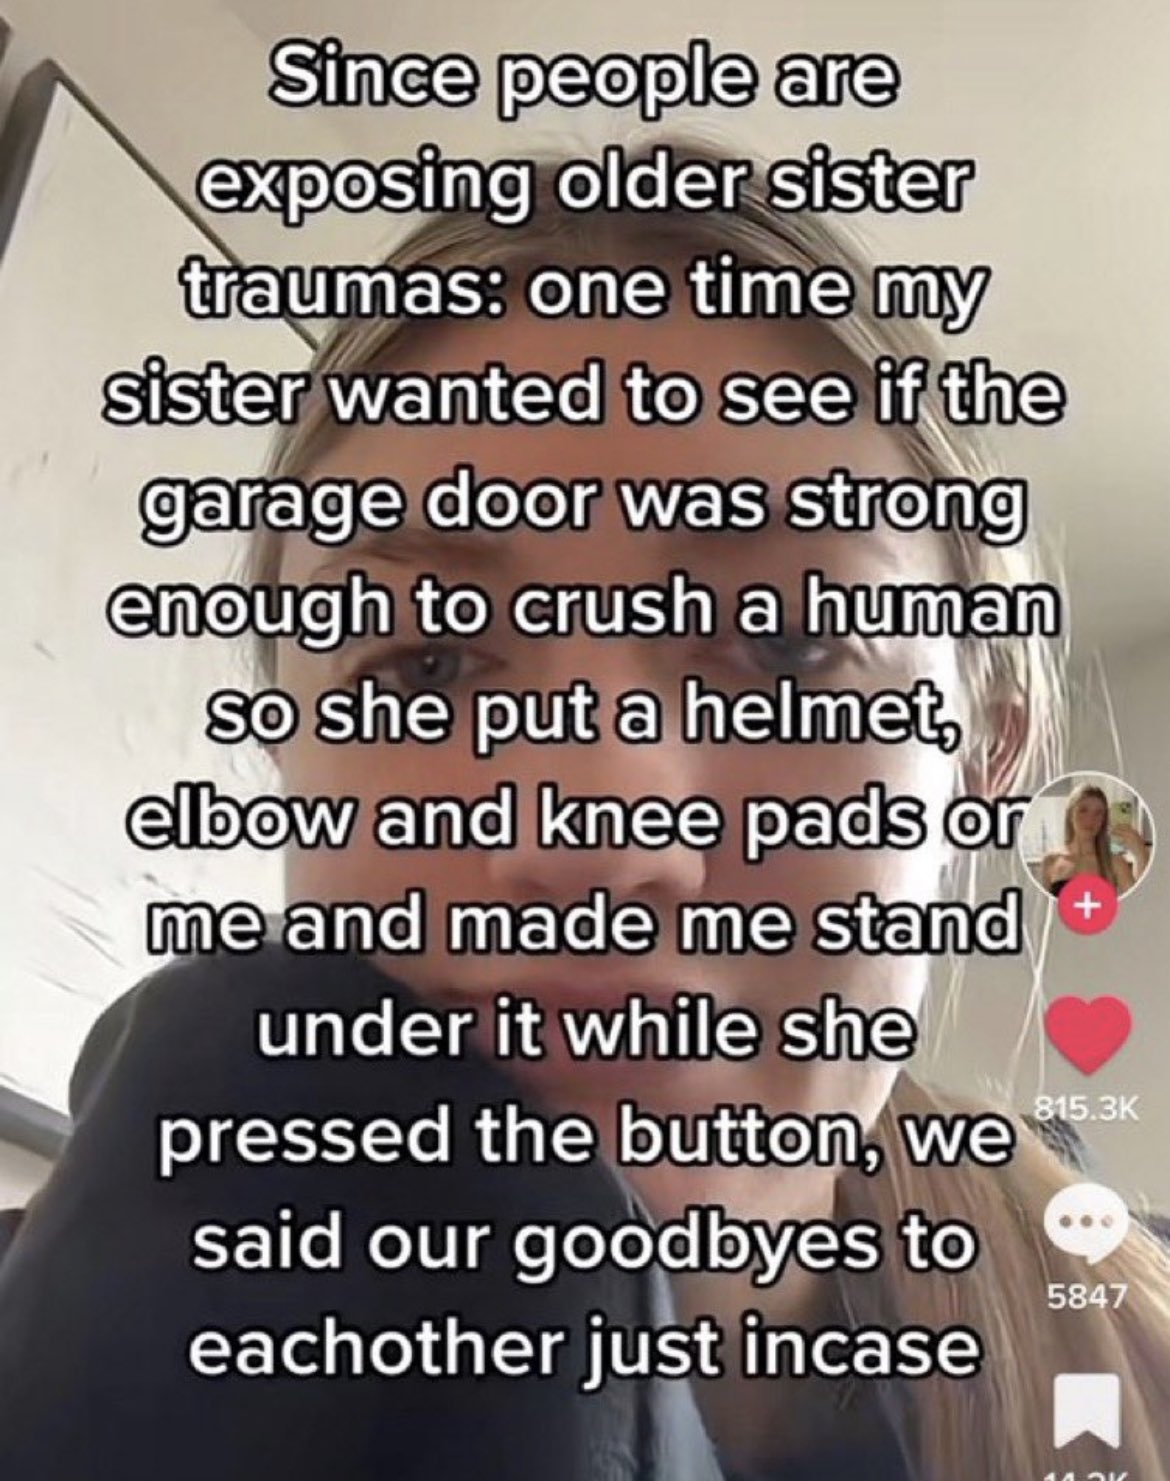 wild tiktok screenshots - Sister - Since people are exposing older sister traumas one time my sister wanted to see if the garage door was strong enough to crush a human so she put a helmet, elbow and knee pads or me and made me stand under it while she pr